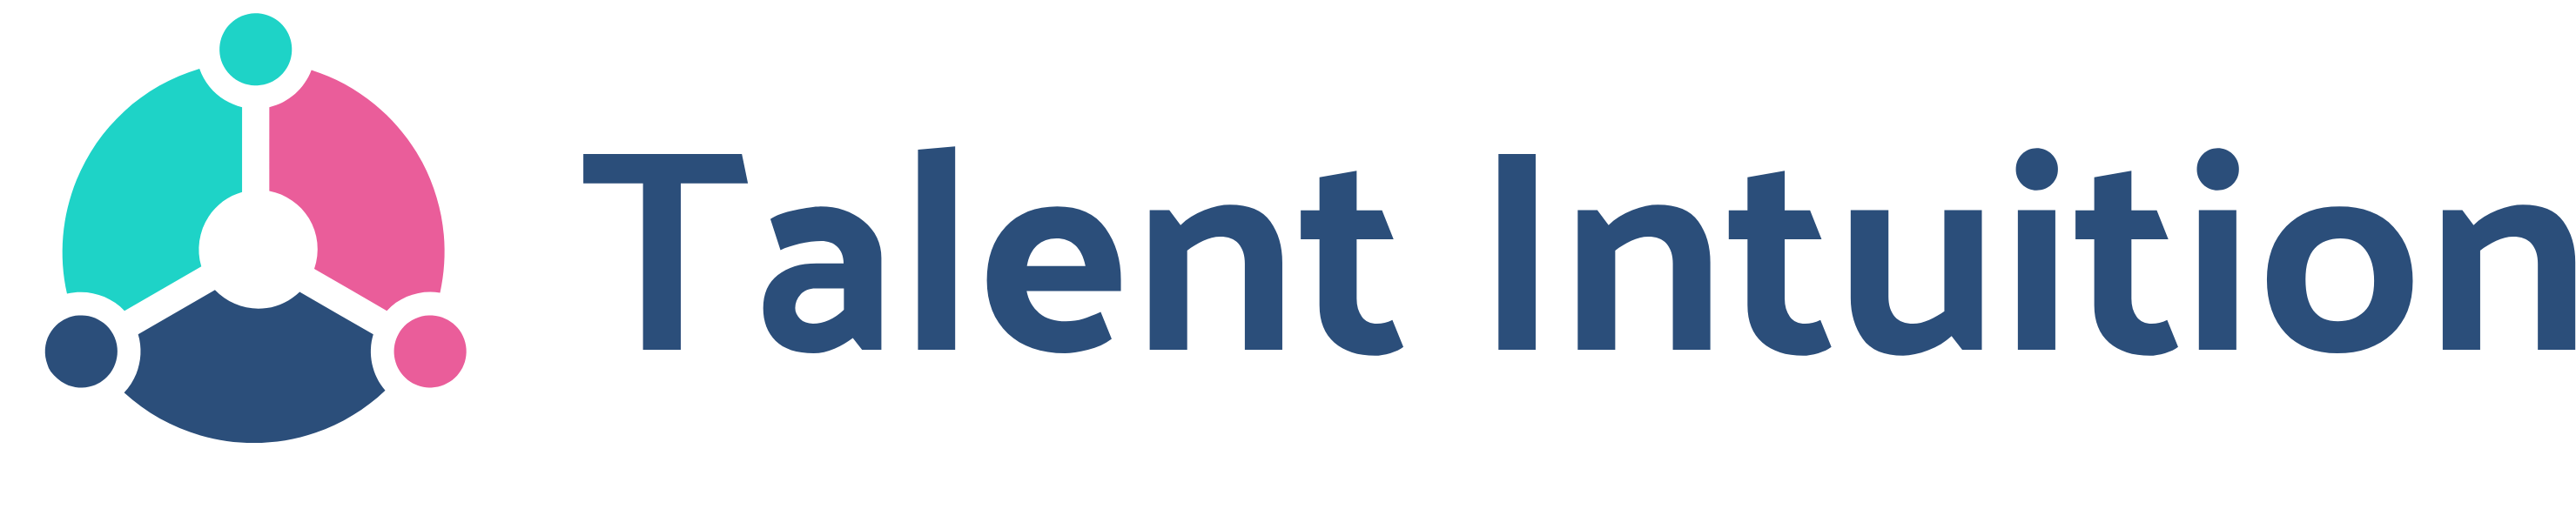 talent intuition logo